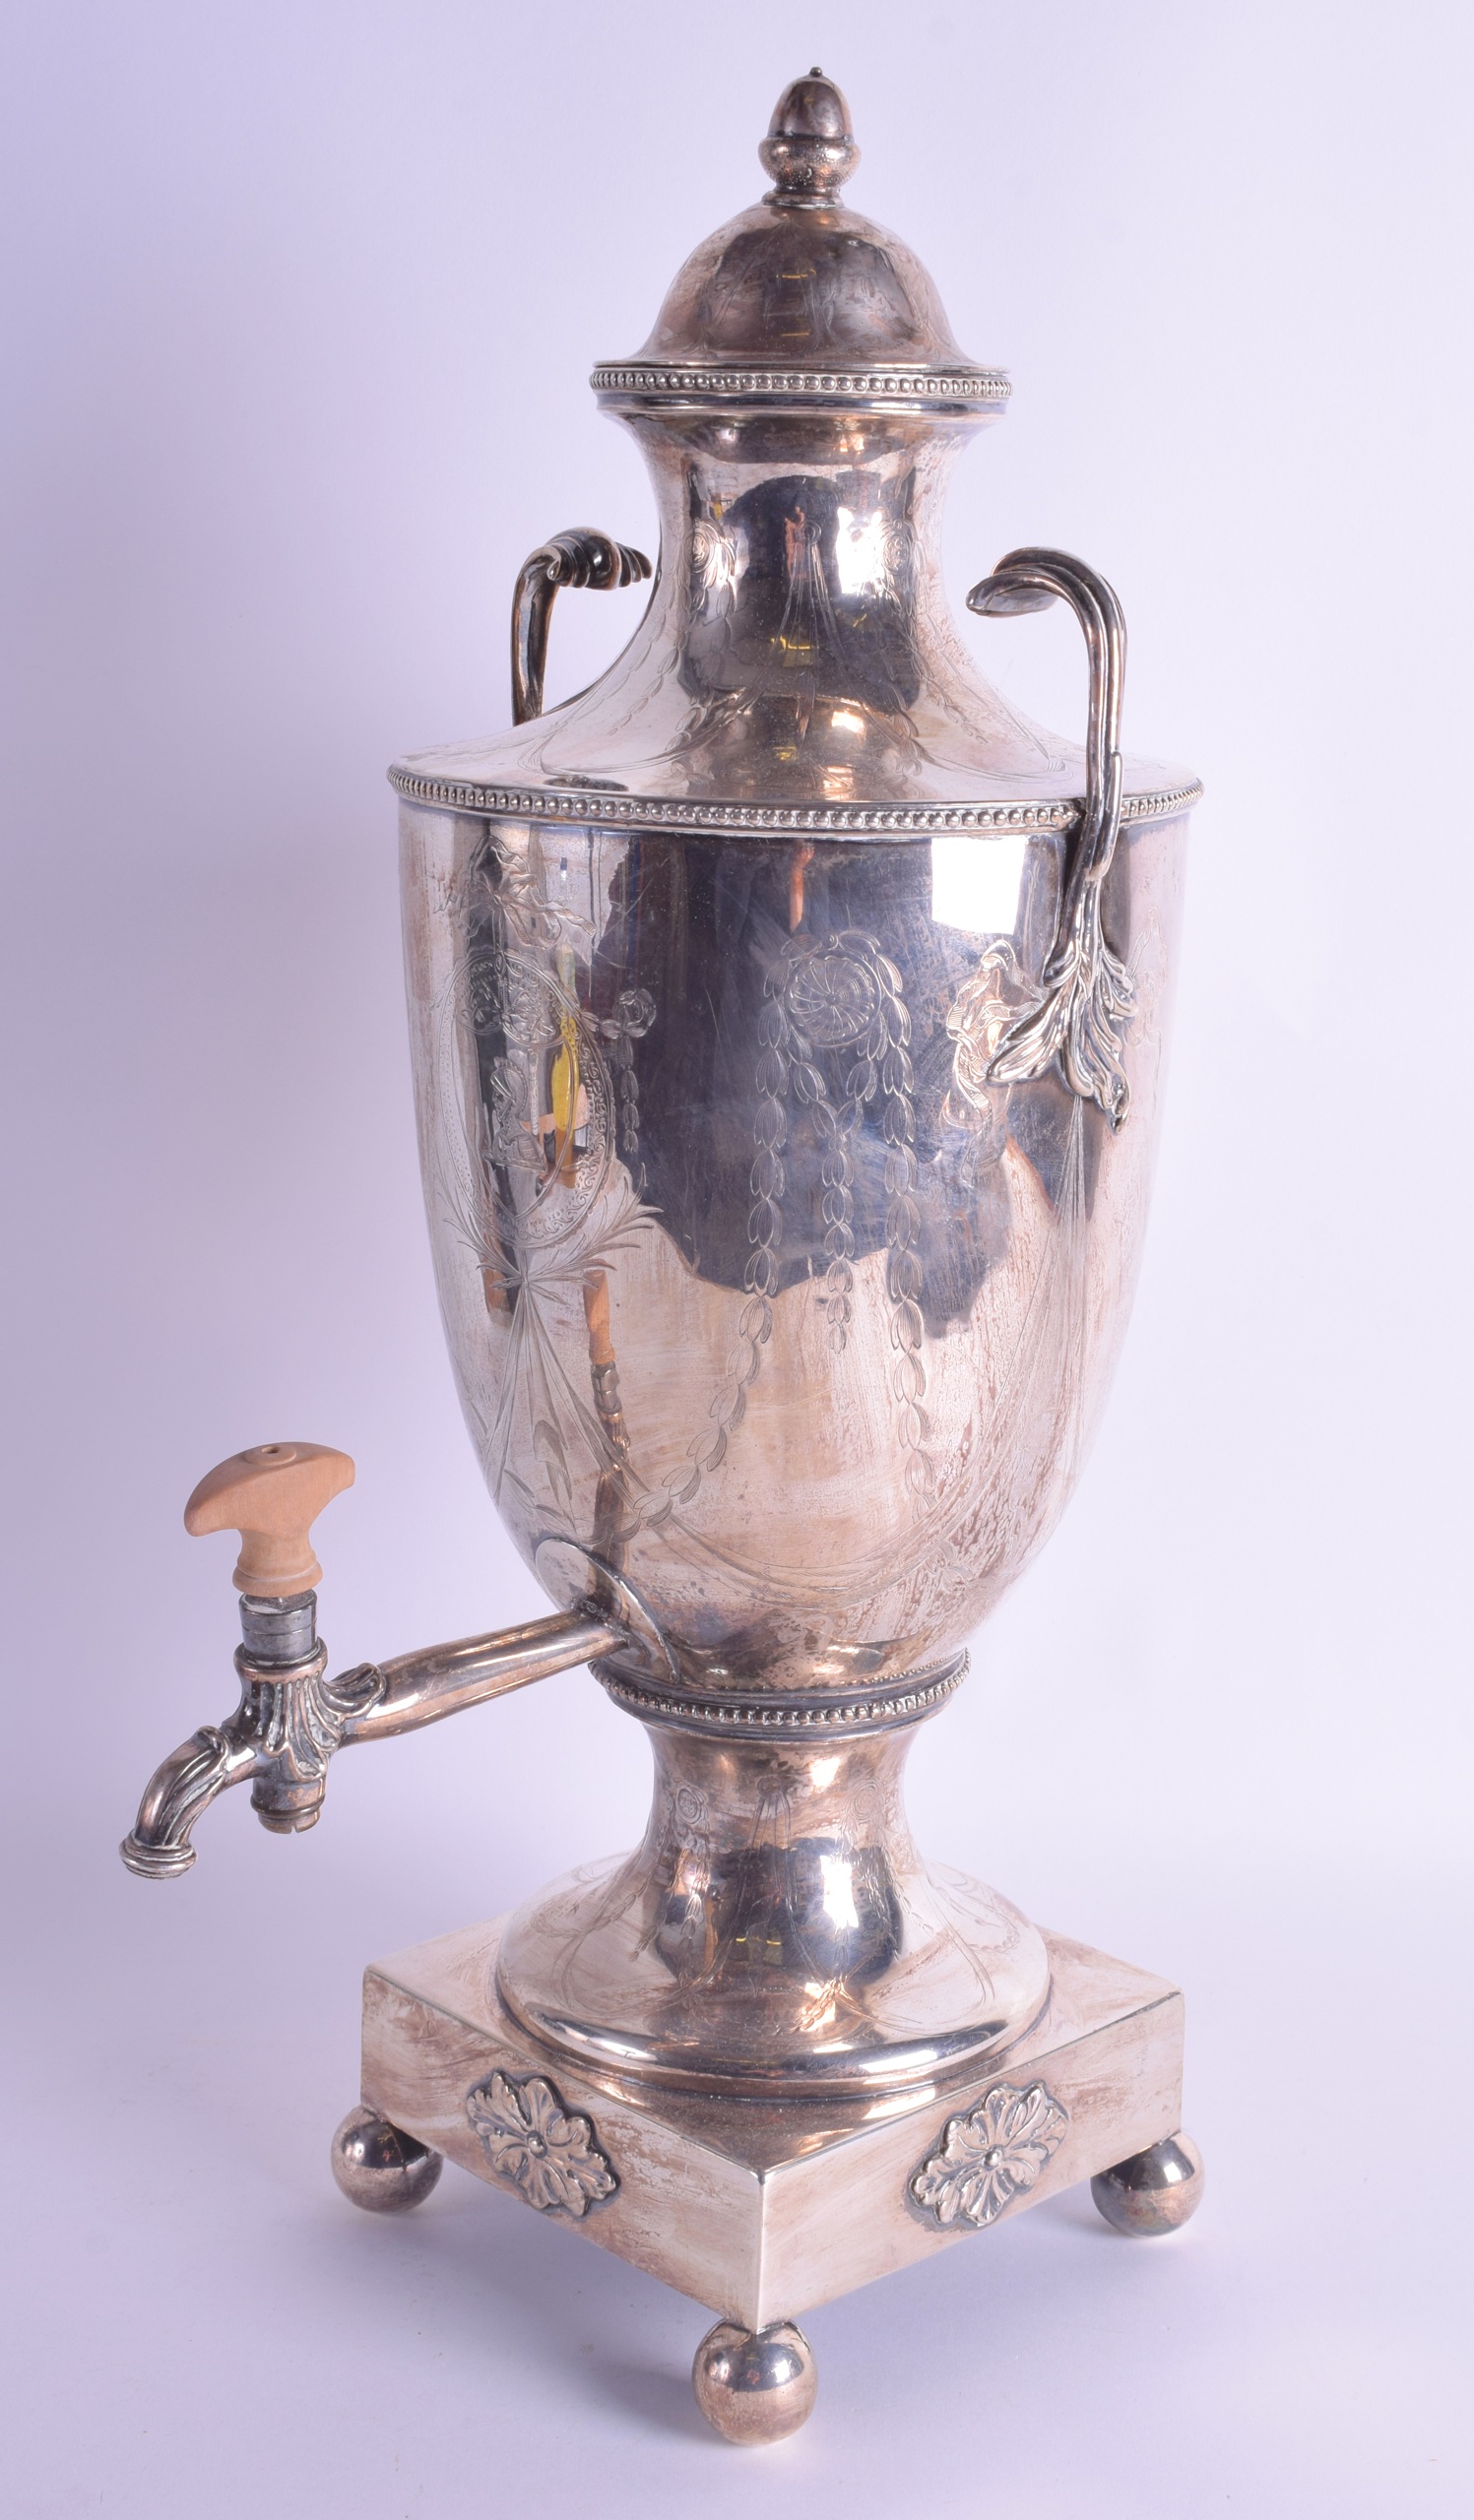 A LARGE GEORGE III SILVER TEA URN decorated with a central crest and floral bands. 54.7 oz. 48 cm x